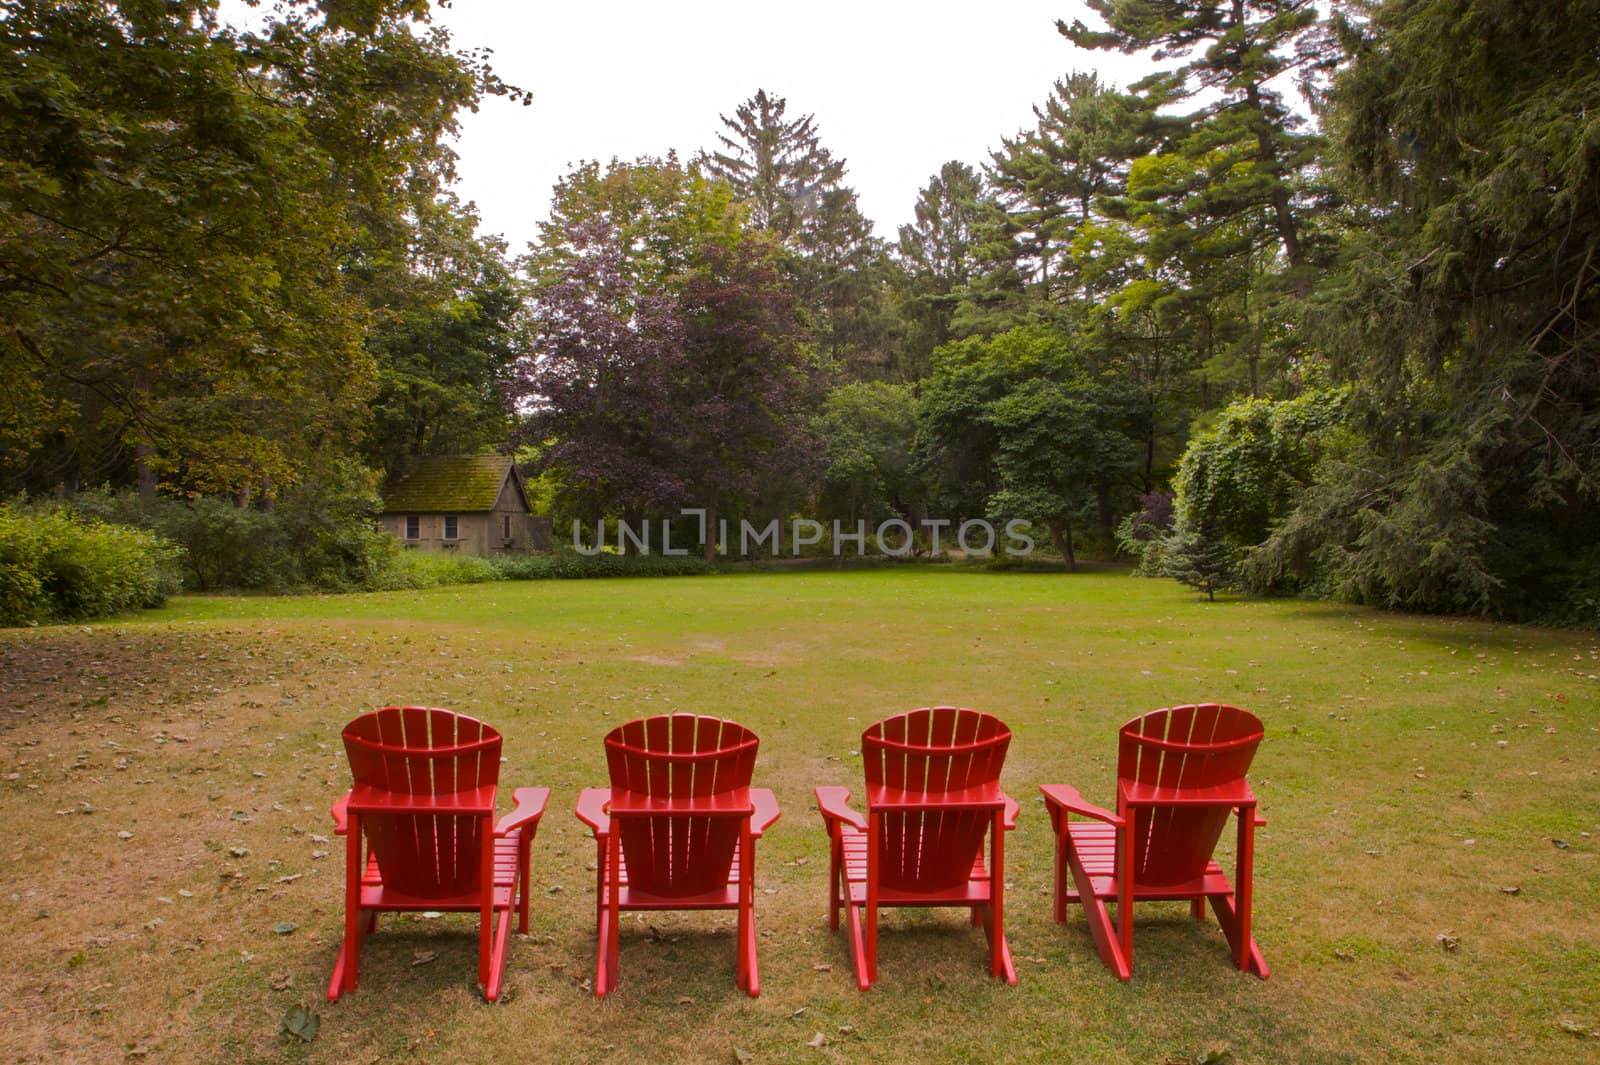 Four red adirondack chairs in a green meadow done in landscape
v